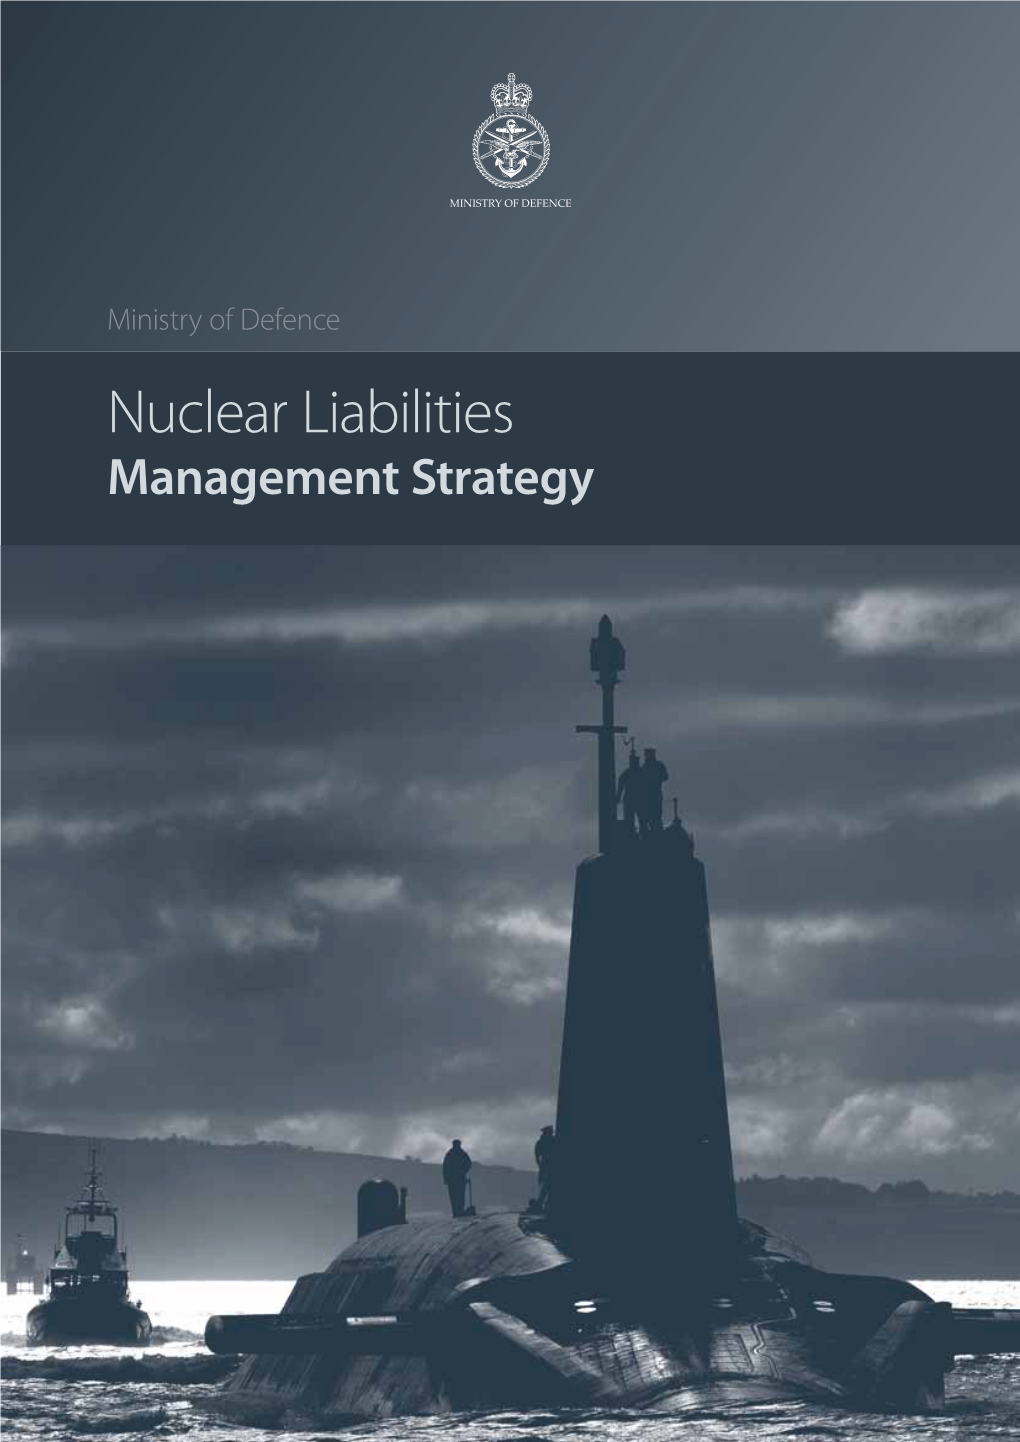 Nuclear Liabilities Management Strategy Contents